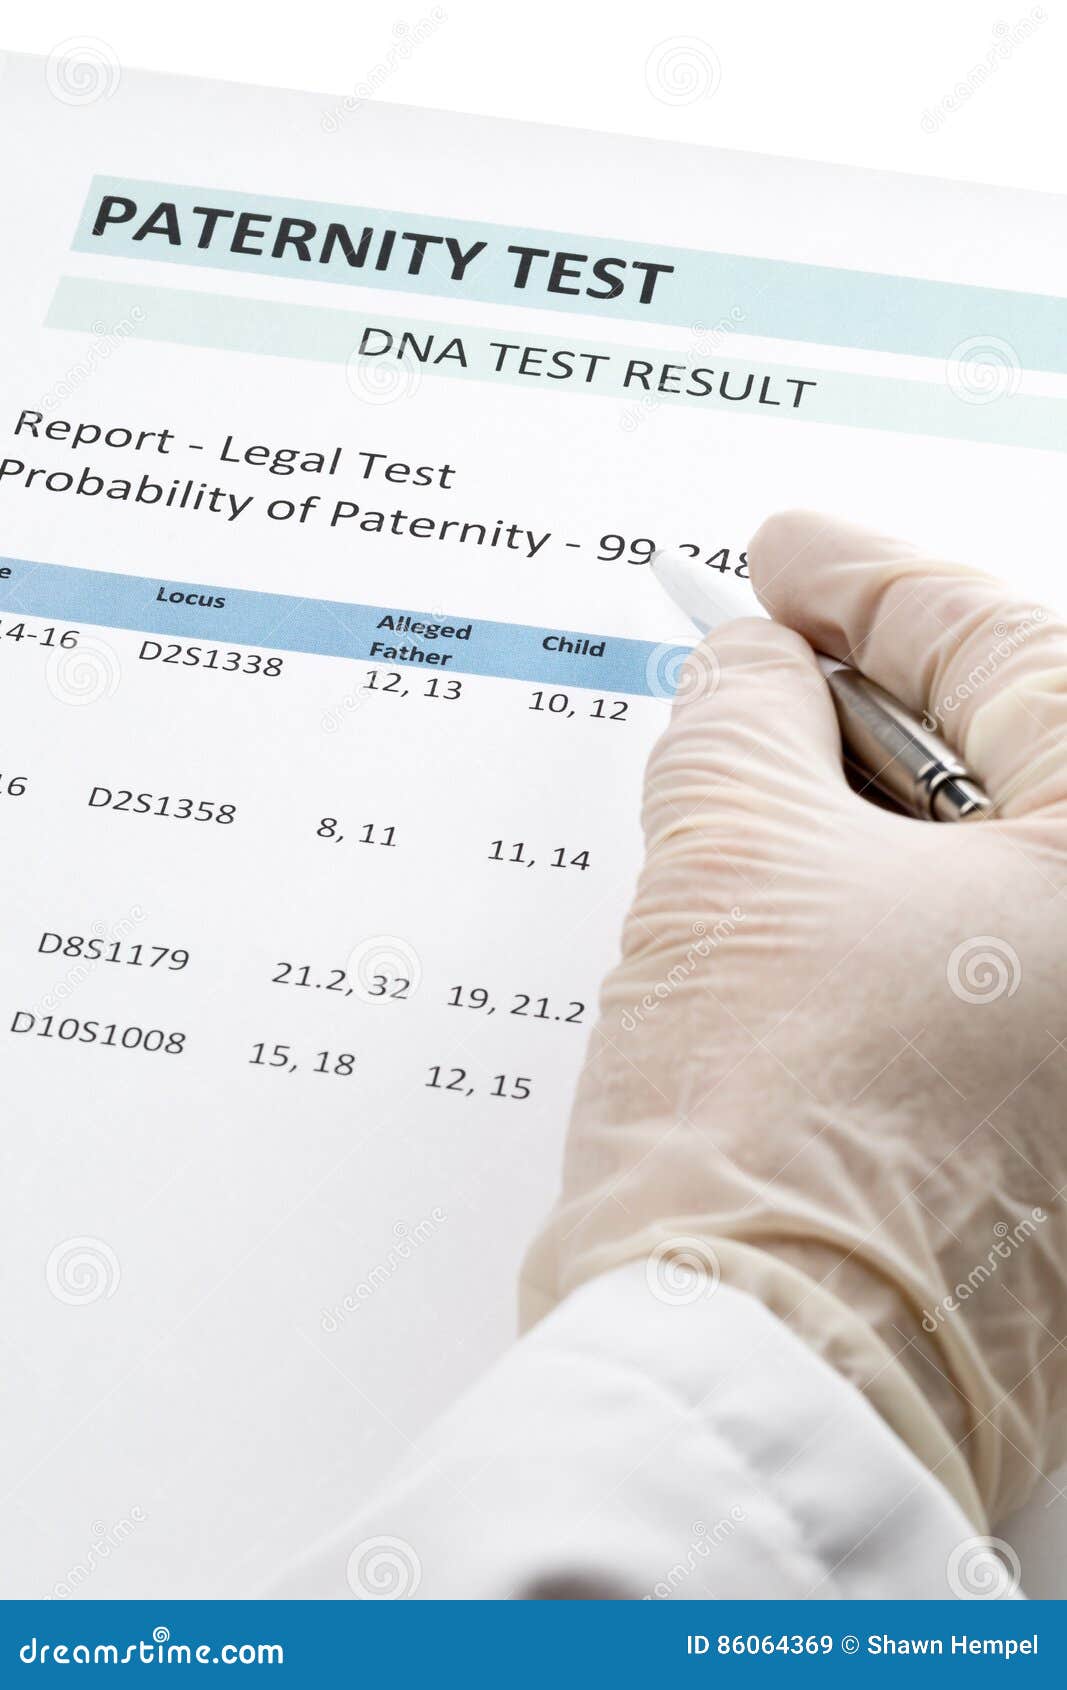 doctor points at result on paternity test result form